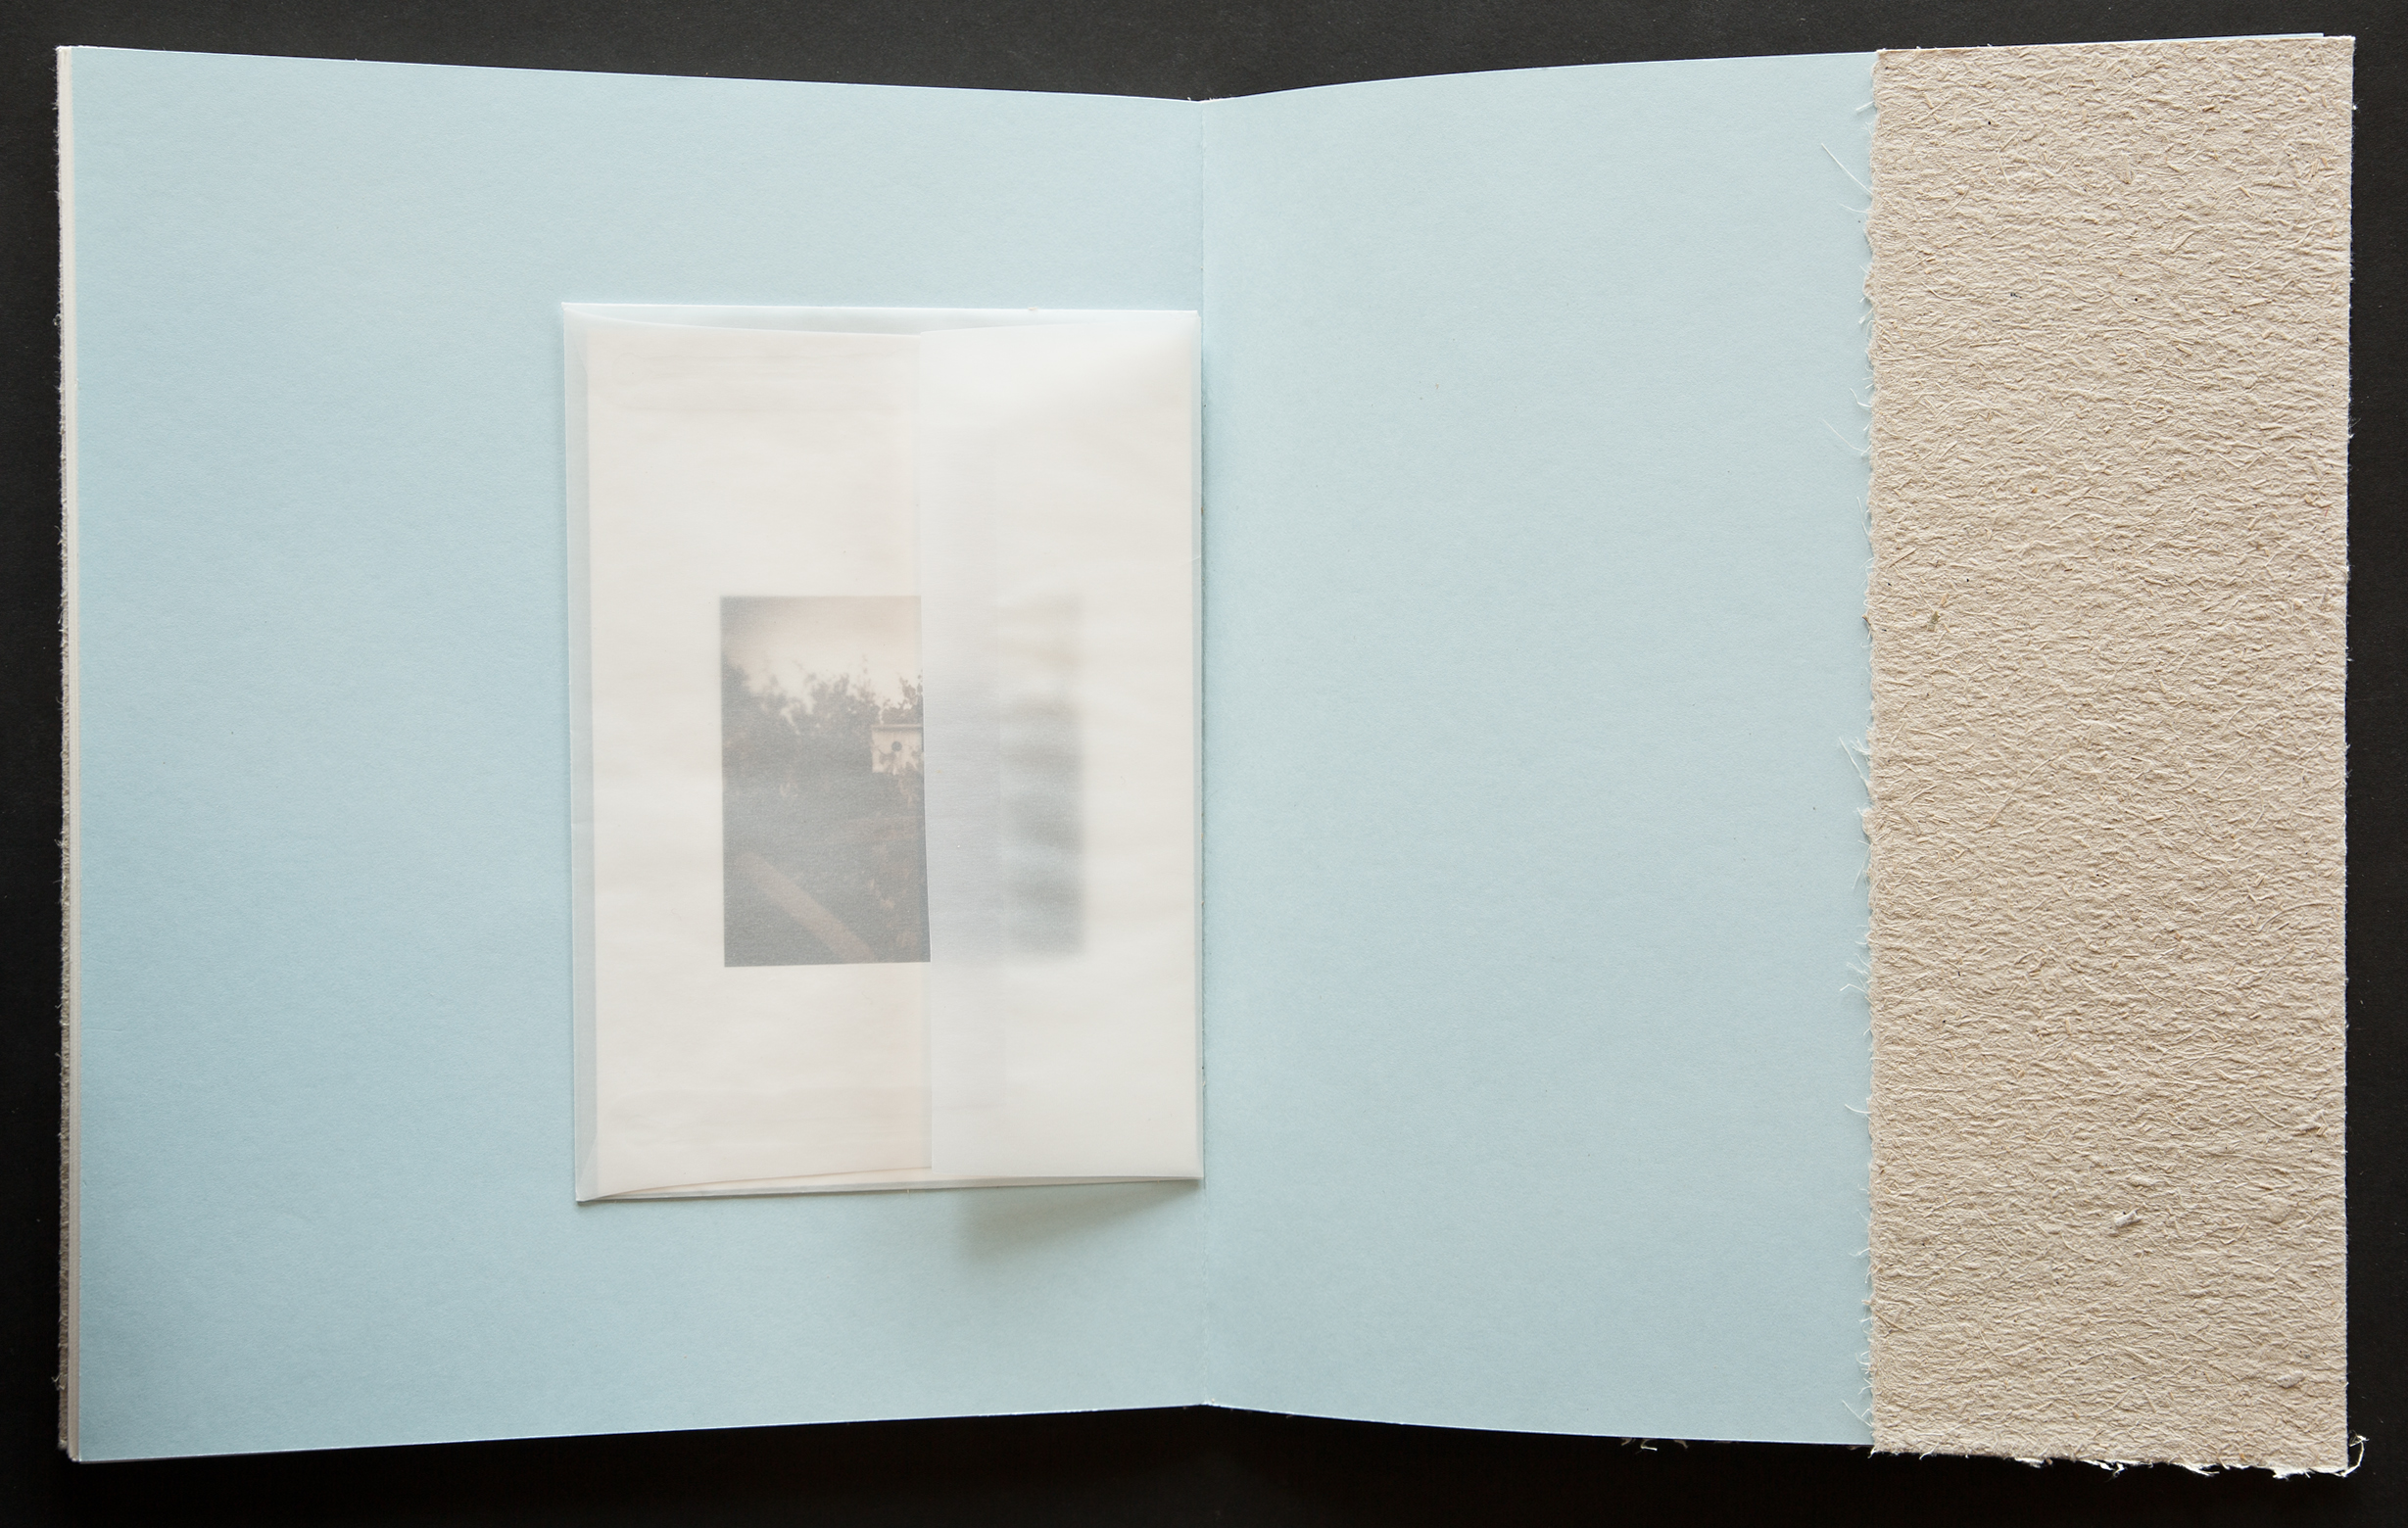  Each hand-sewn book includes a print suitable for framing inside a translucent envelop adhered to the inside back cover. 